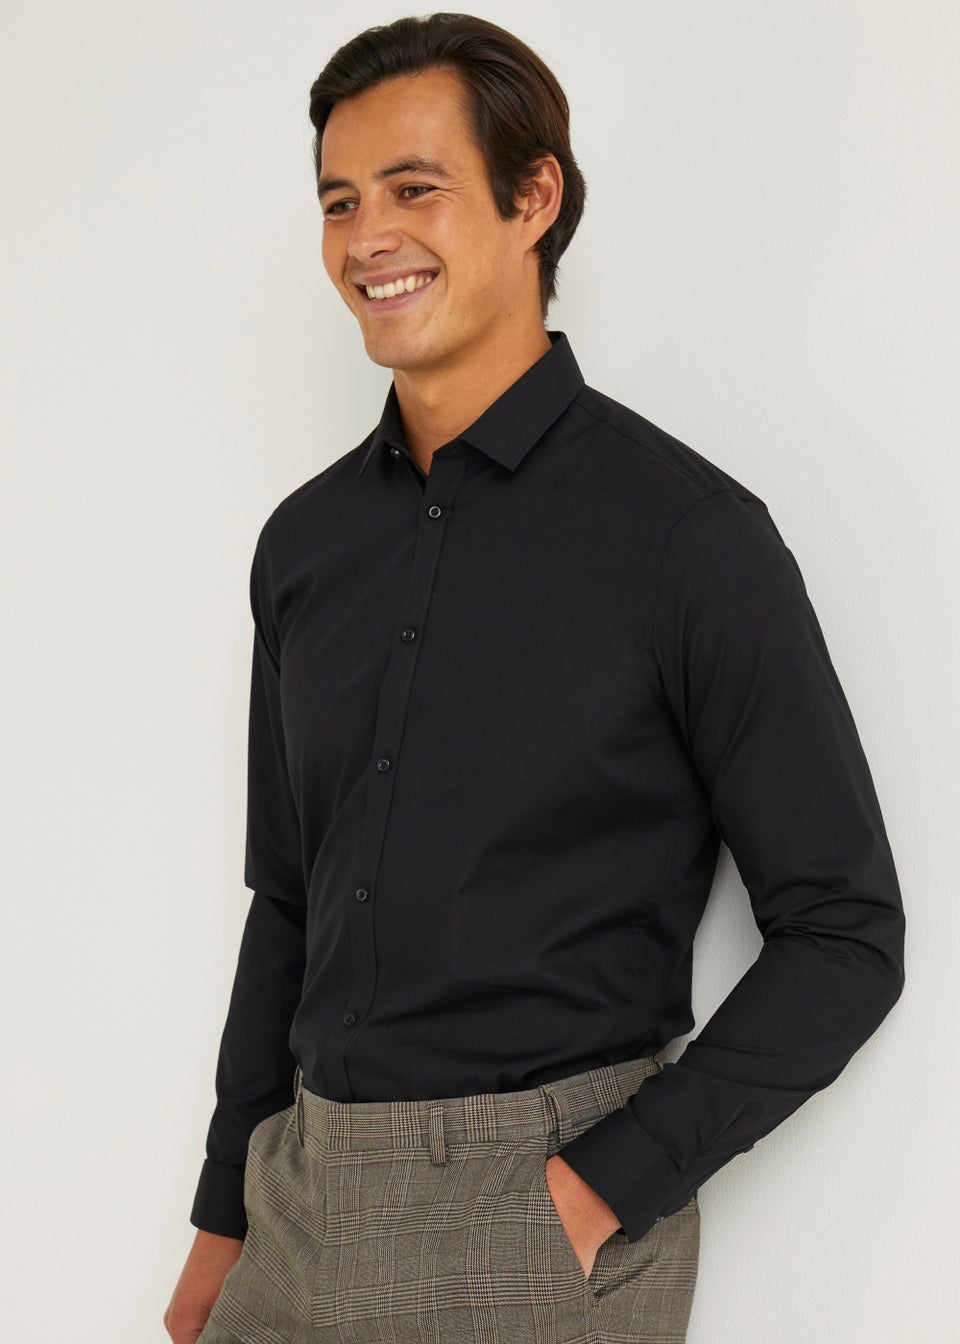 Taylor & Wright Black Easy Care Slim Fit Shirt